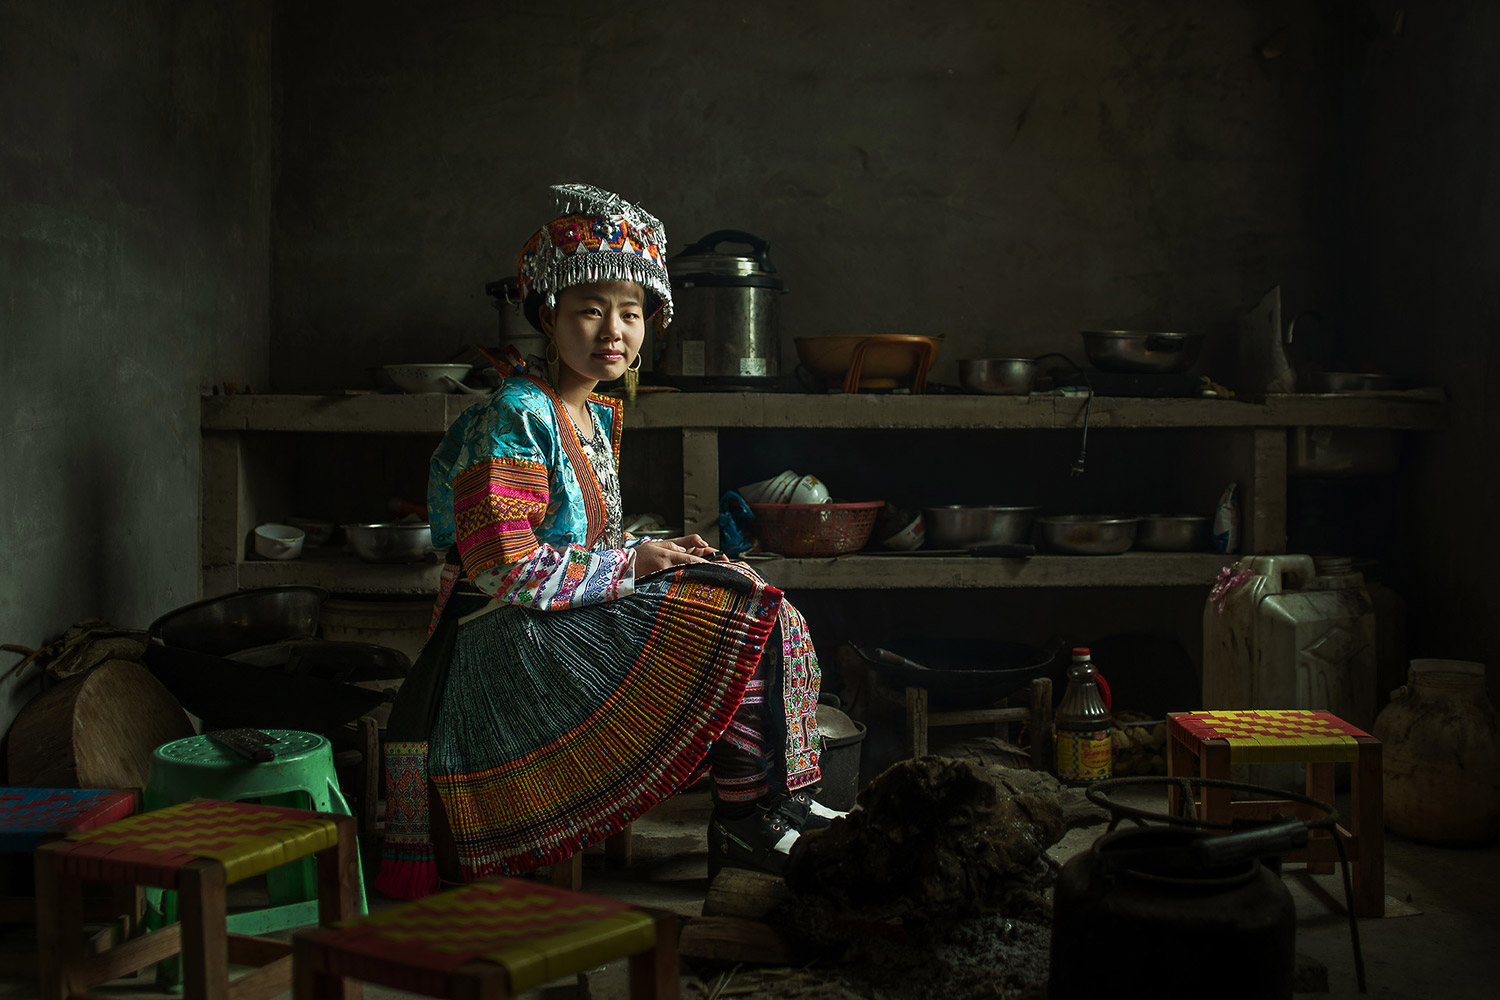 Chinese Miao, © Hongqi Ye, Shanghai, China, First Place Amateur : Commercial/Editorial/Assignment, Grand Prize, PDN Faces - Portrait Photography Contest